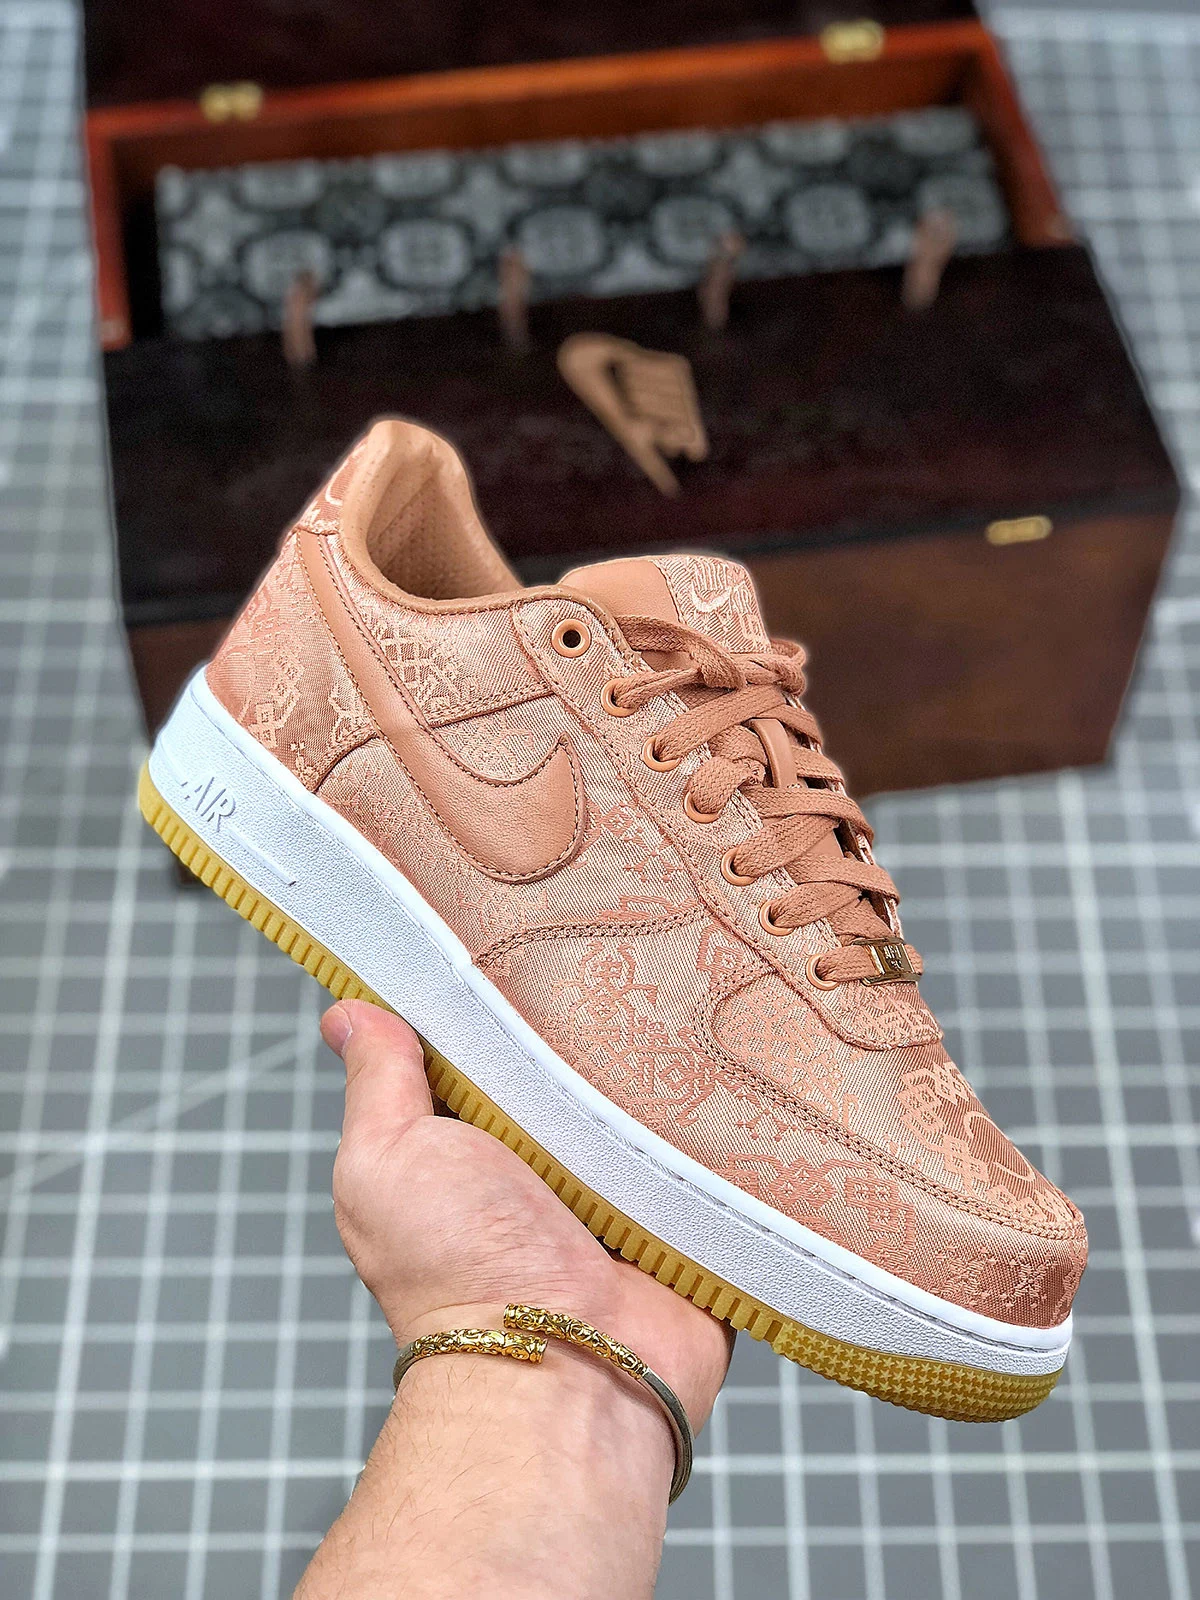 CLOT x Nike Air Force 1 Rose Gold White-Gum Light Brown For Sale